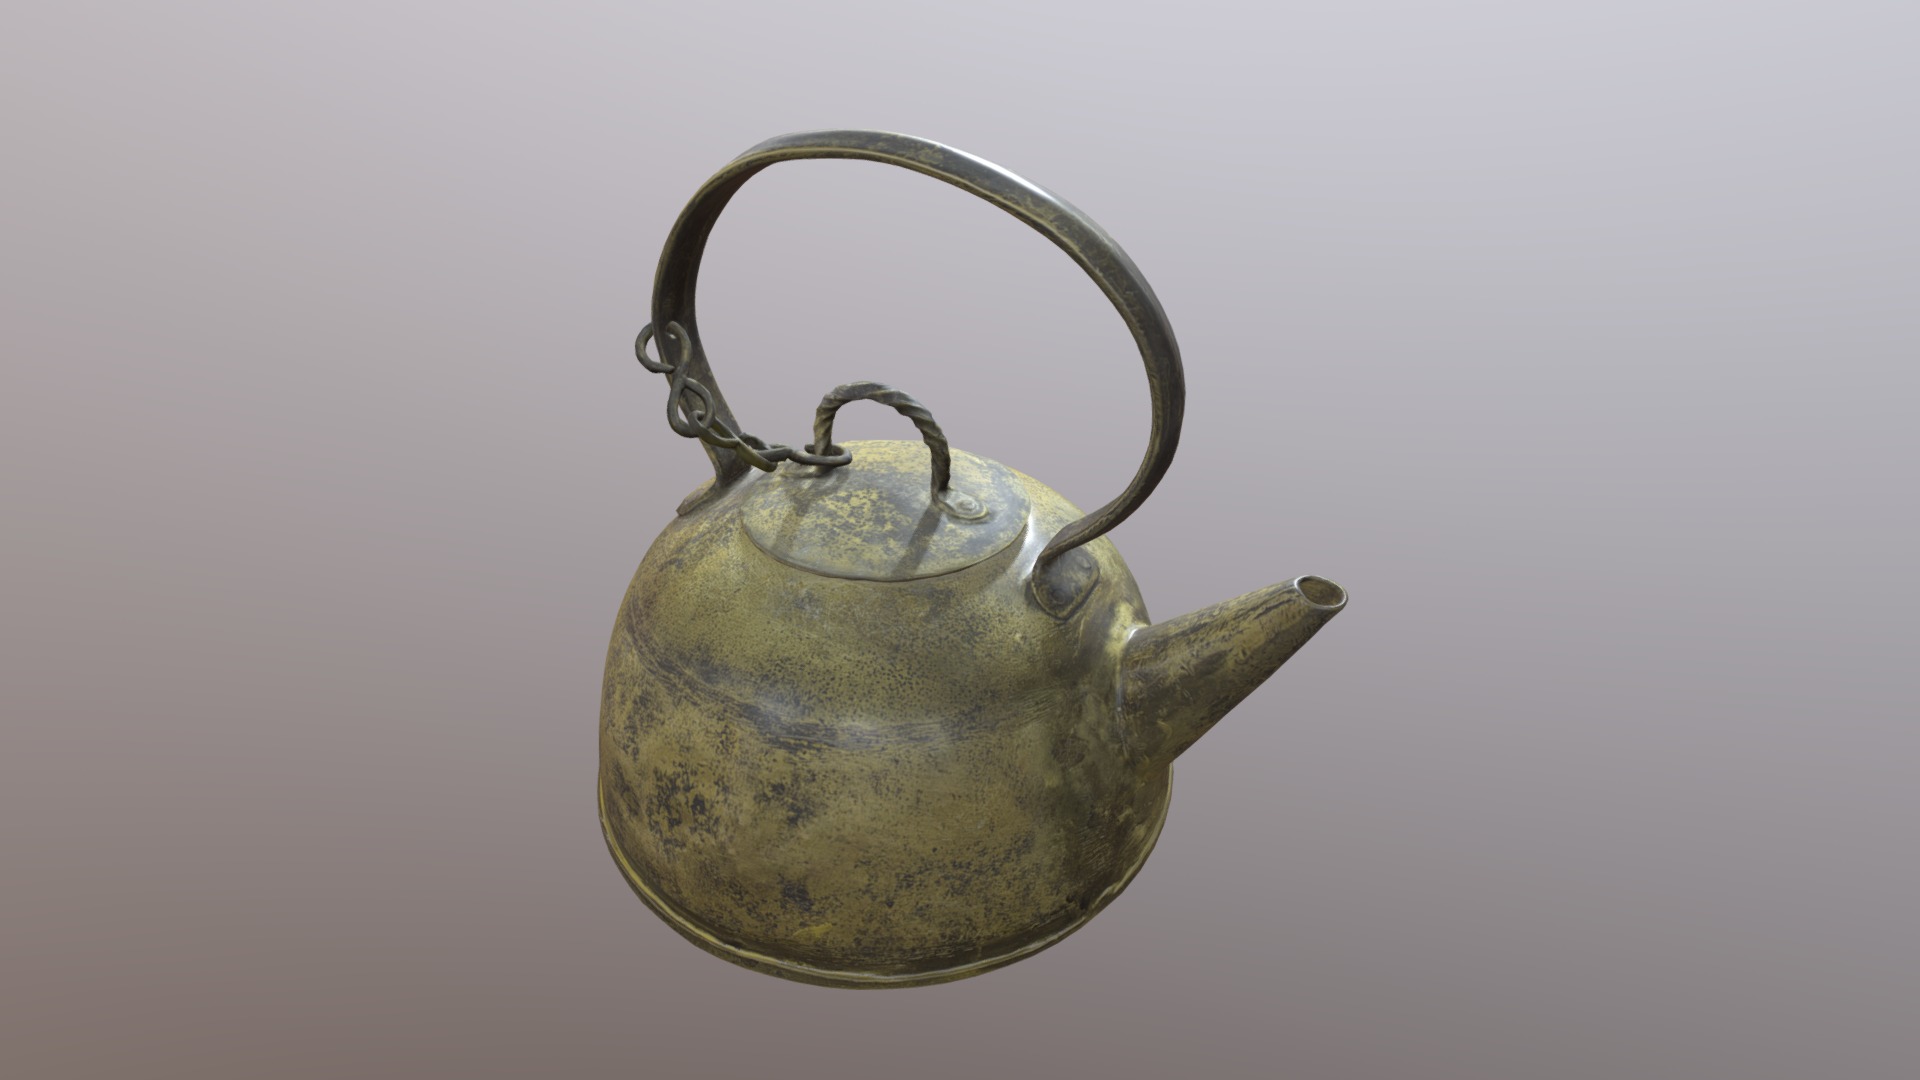 3D model Teapot, Chinese antique - This is a 3D model of the Teapot, Chinese antique. The 3D model is about a metal teapot with a handle.